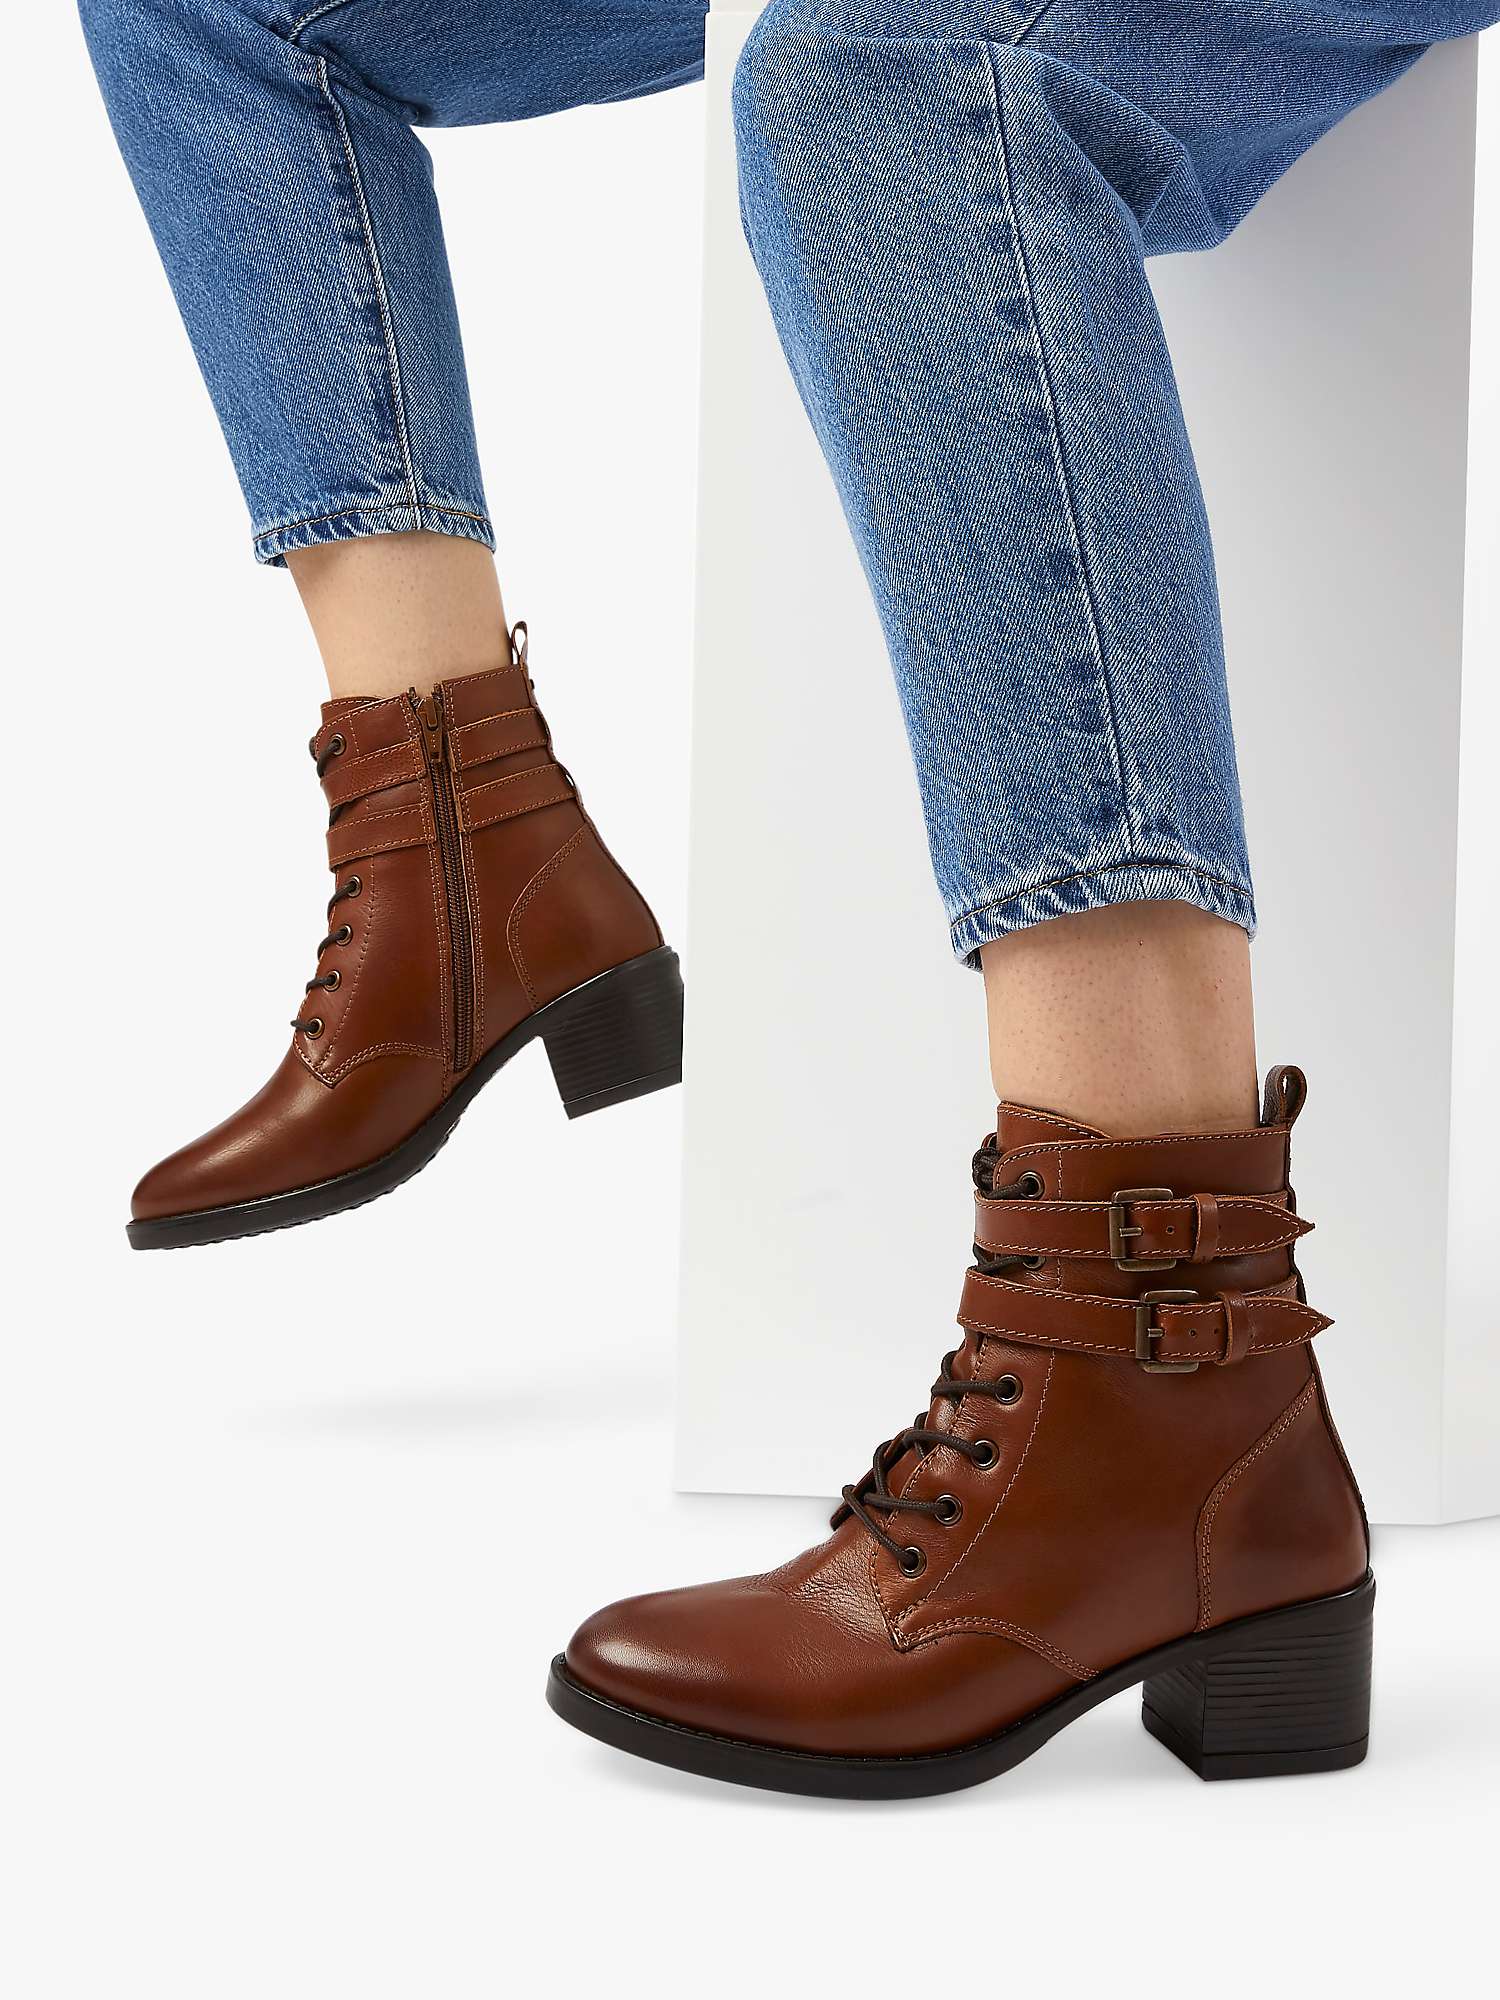 Buy Dune Wide Fit Paxan Leather Ankle Boots Online at johnlewis.com